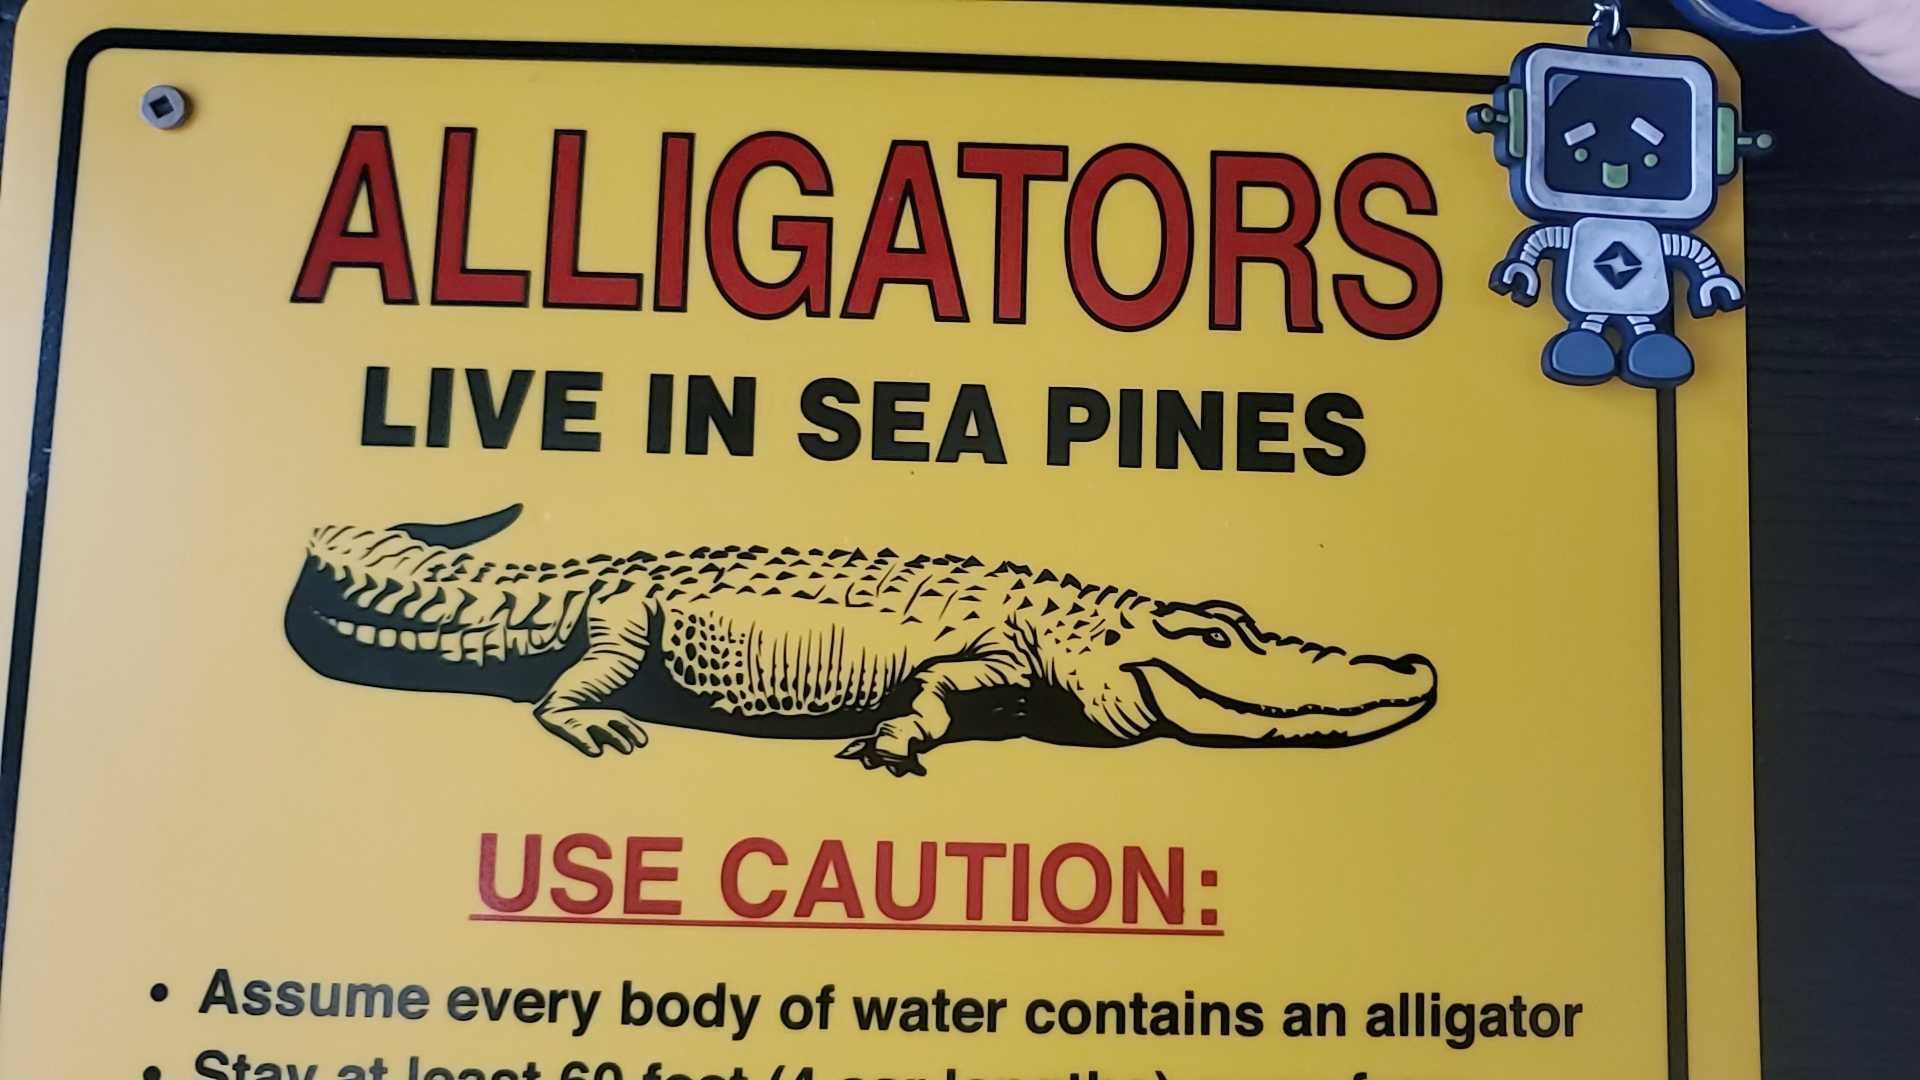 RoBert was not happy with the Hilton Head Island nature hike. Especially after it was explained that an alligator's bite pressure can reach more than 2000 PSI, enough to bite through steel.